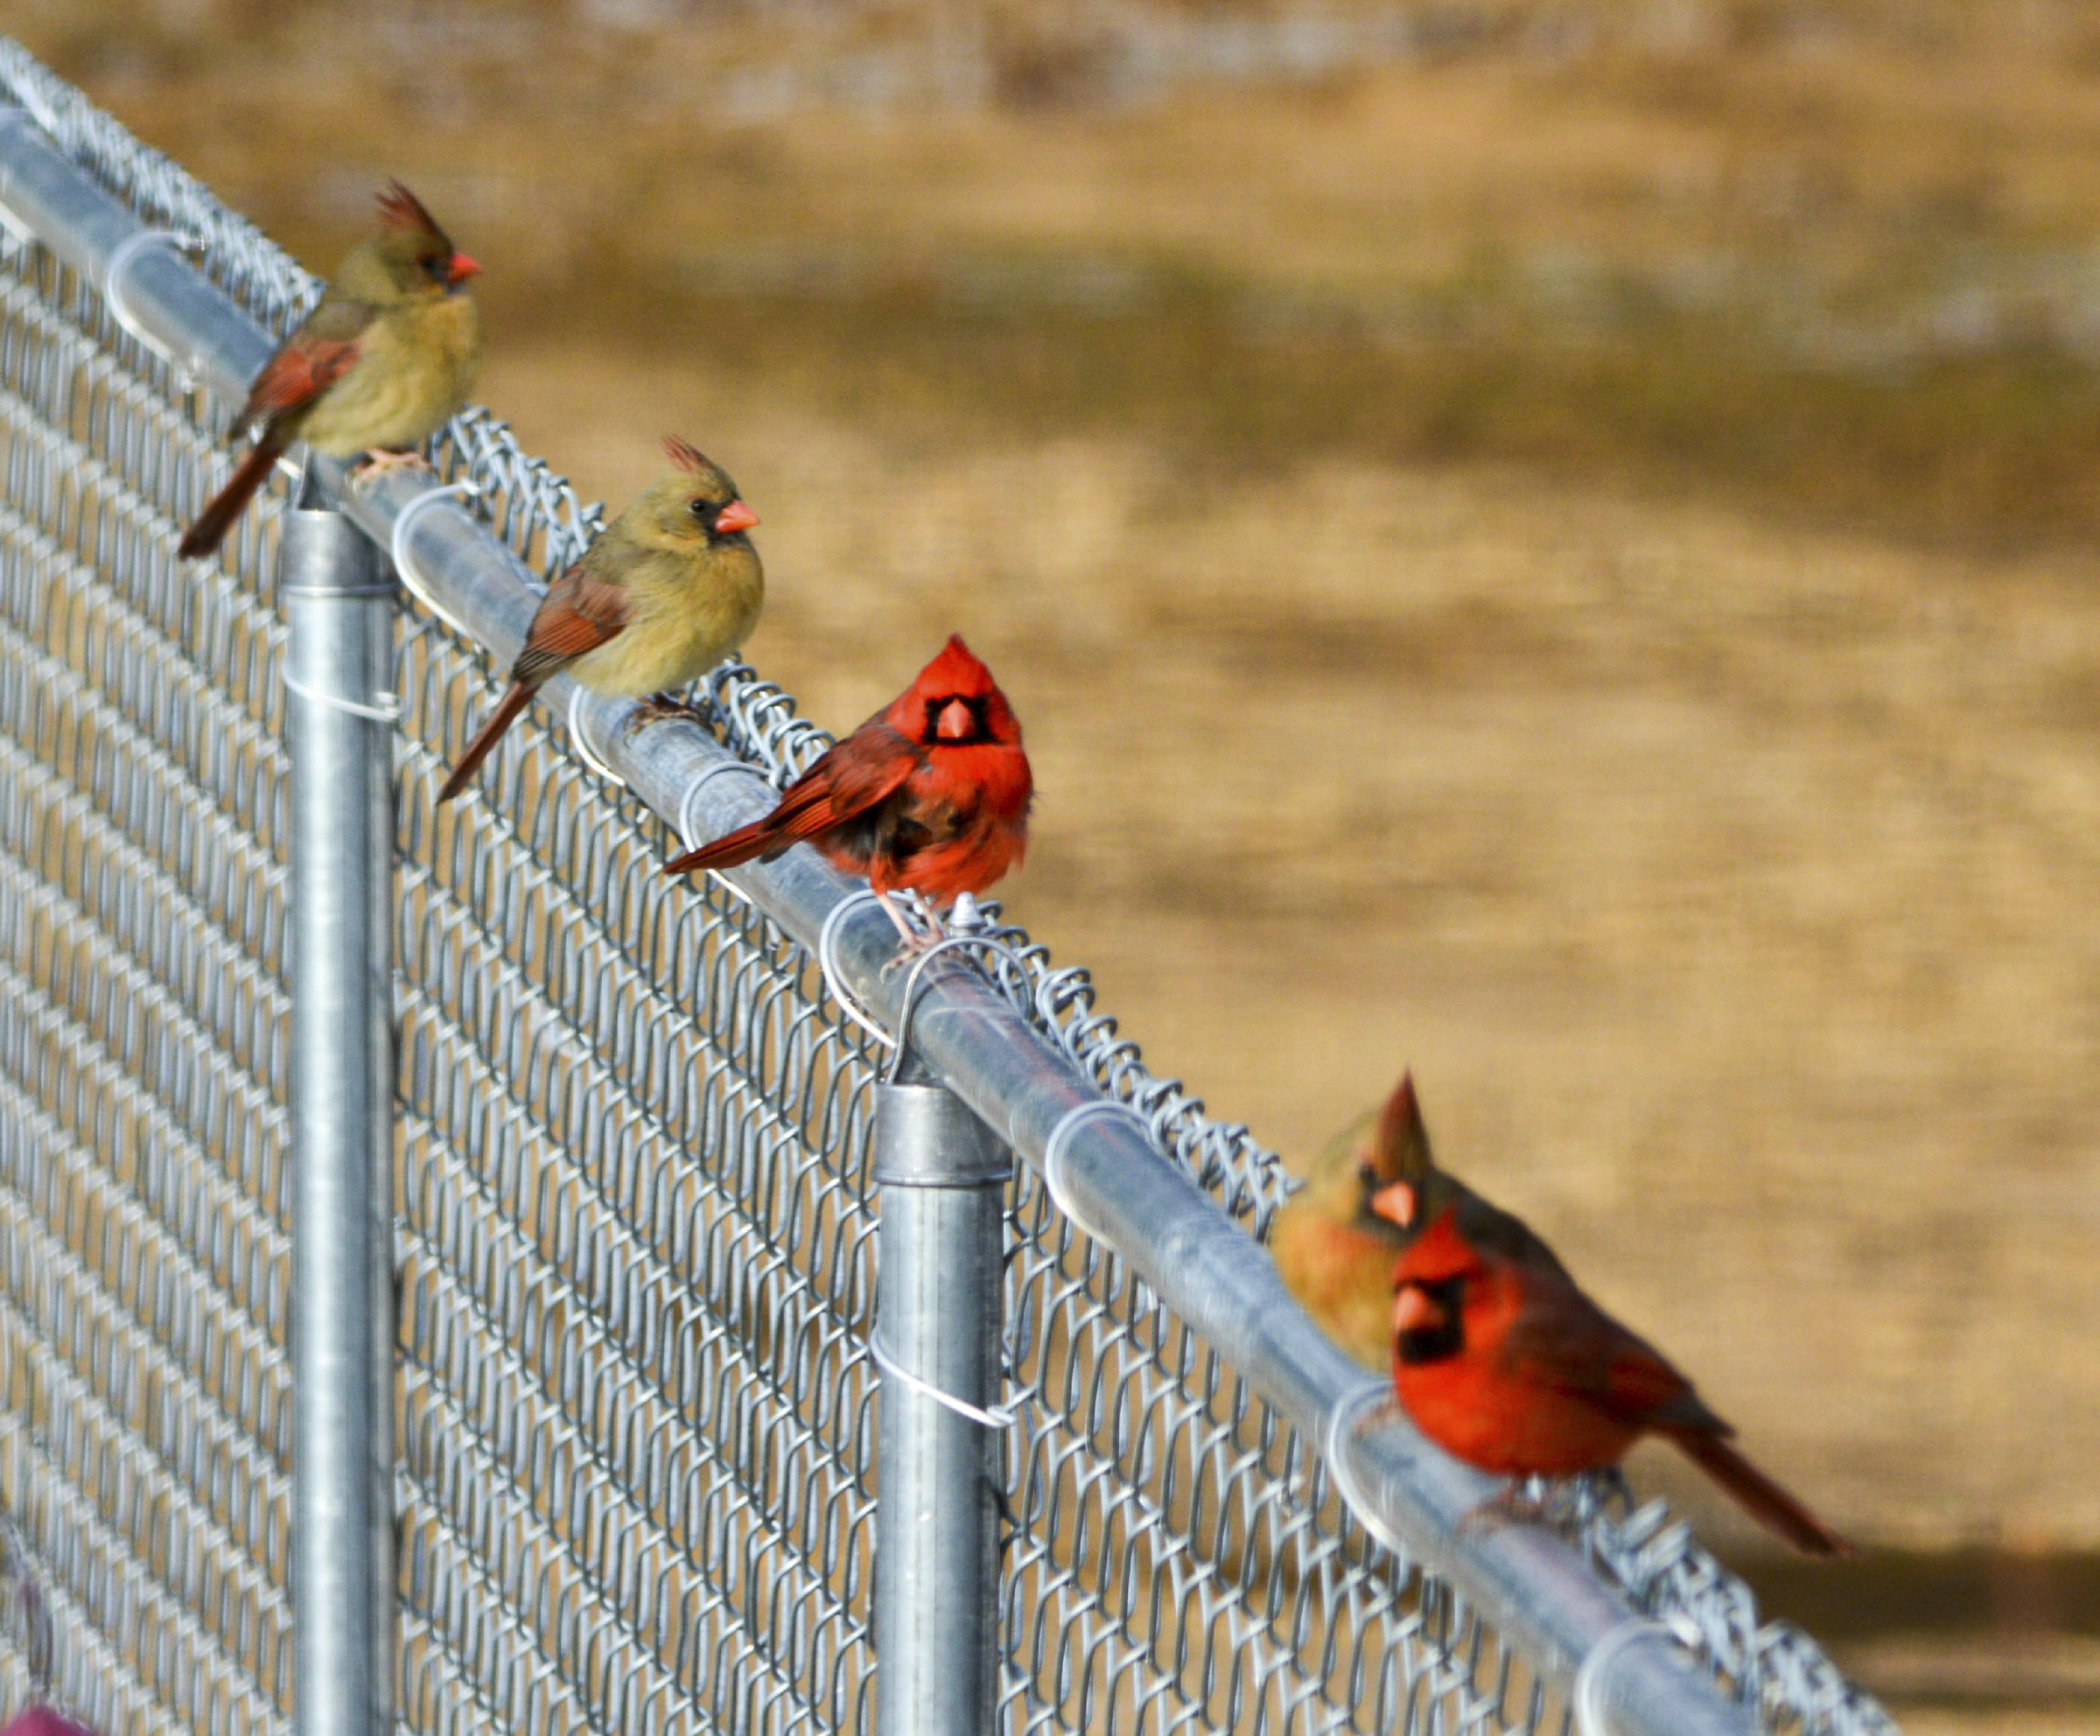 Four Northern Cardinal sitting on a chain link fence.